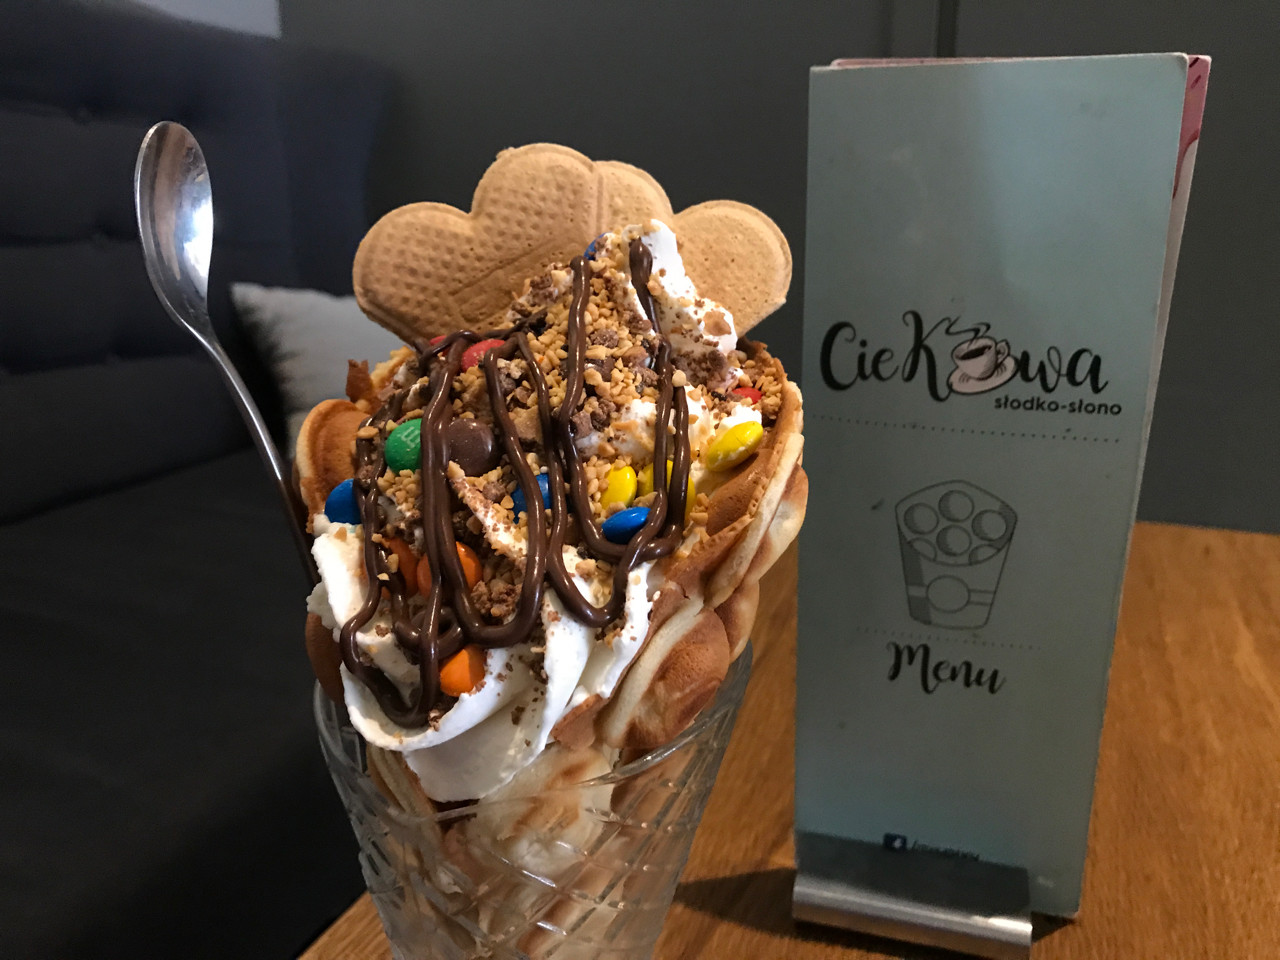 14 Fantastic Ice Cream Cone Flower Vase 2024 free download ice cream cone flower vase of cold comforts ciekawa sac282odko sac282ono in tarnac2b3w poland foodwatershoes in the zachcianka bubble waffle two scoops of ice cream mms chocolate sauce